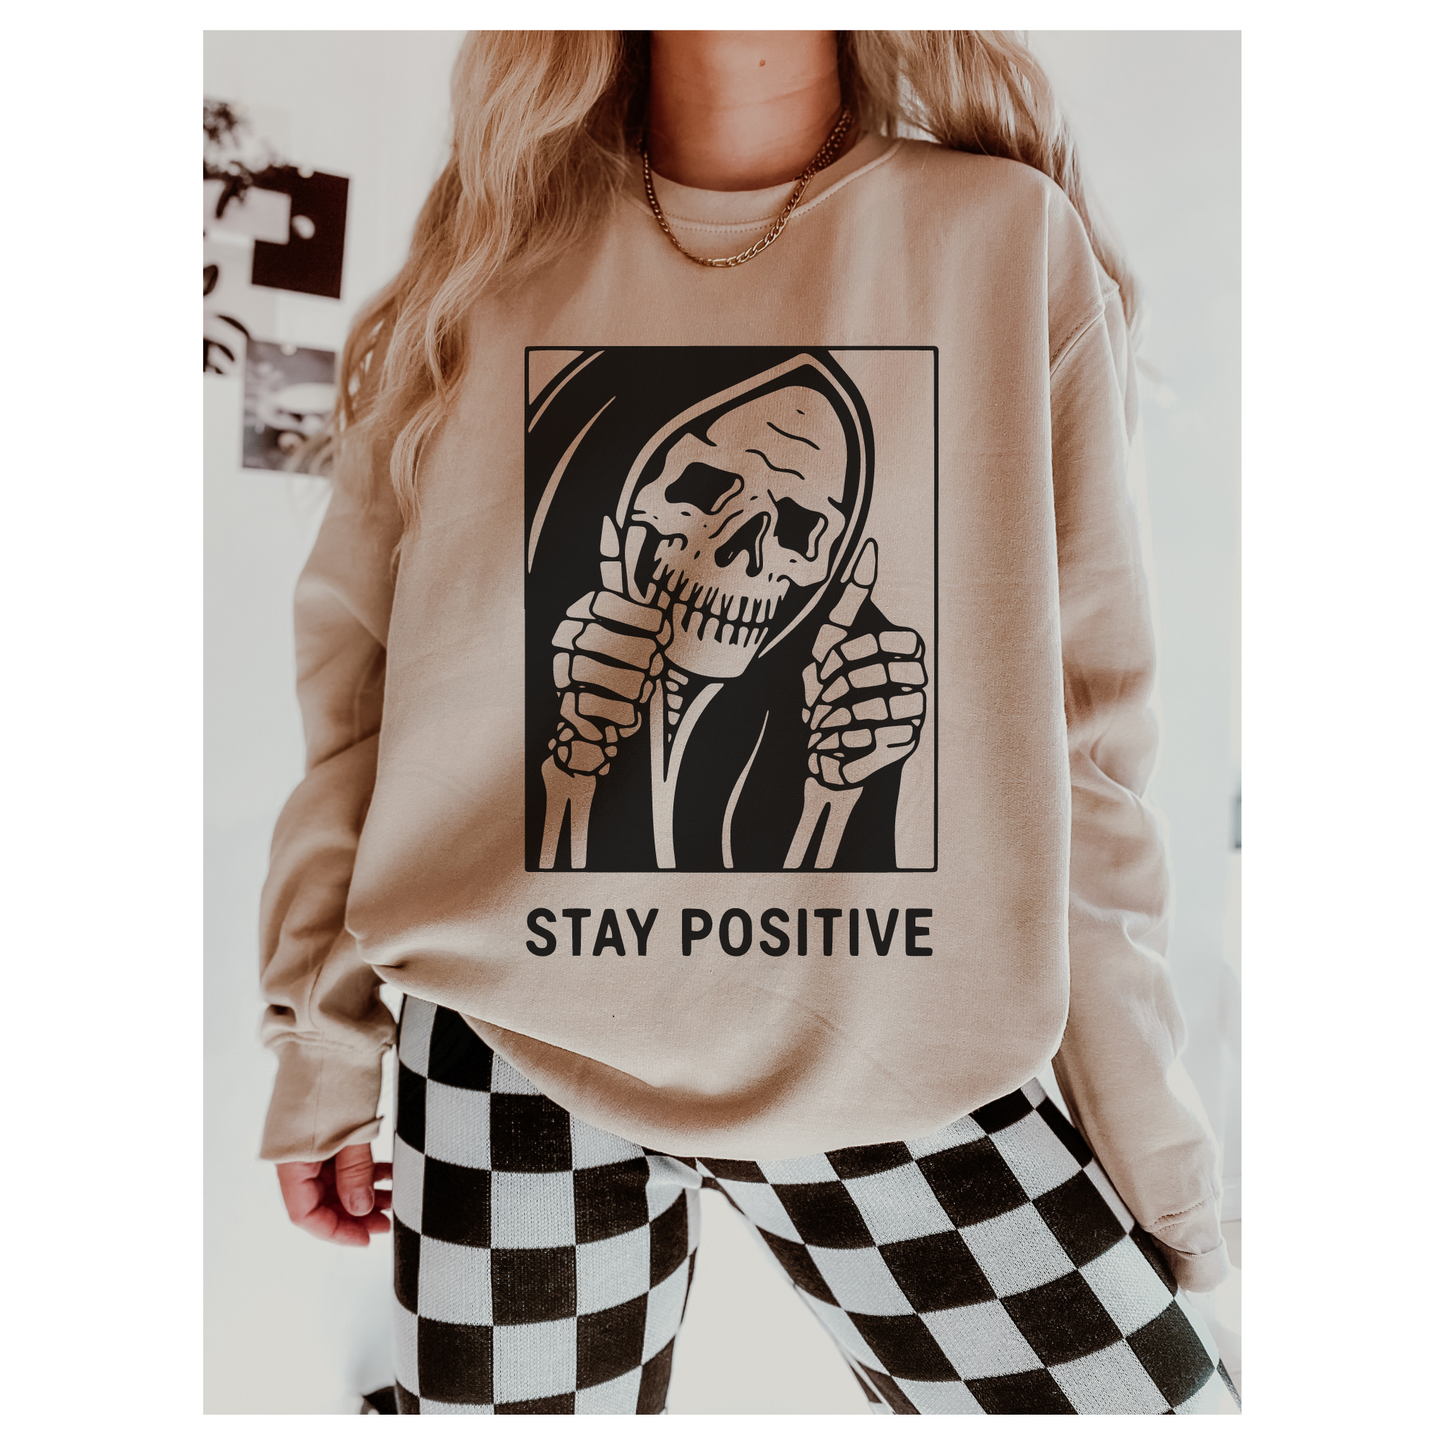 Stay Positive Shirt